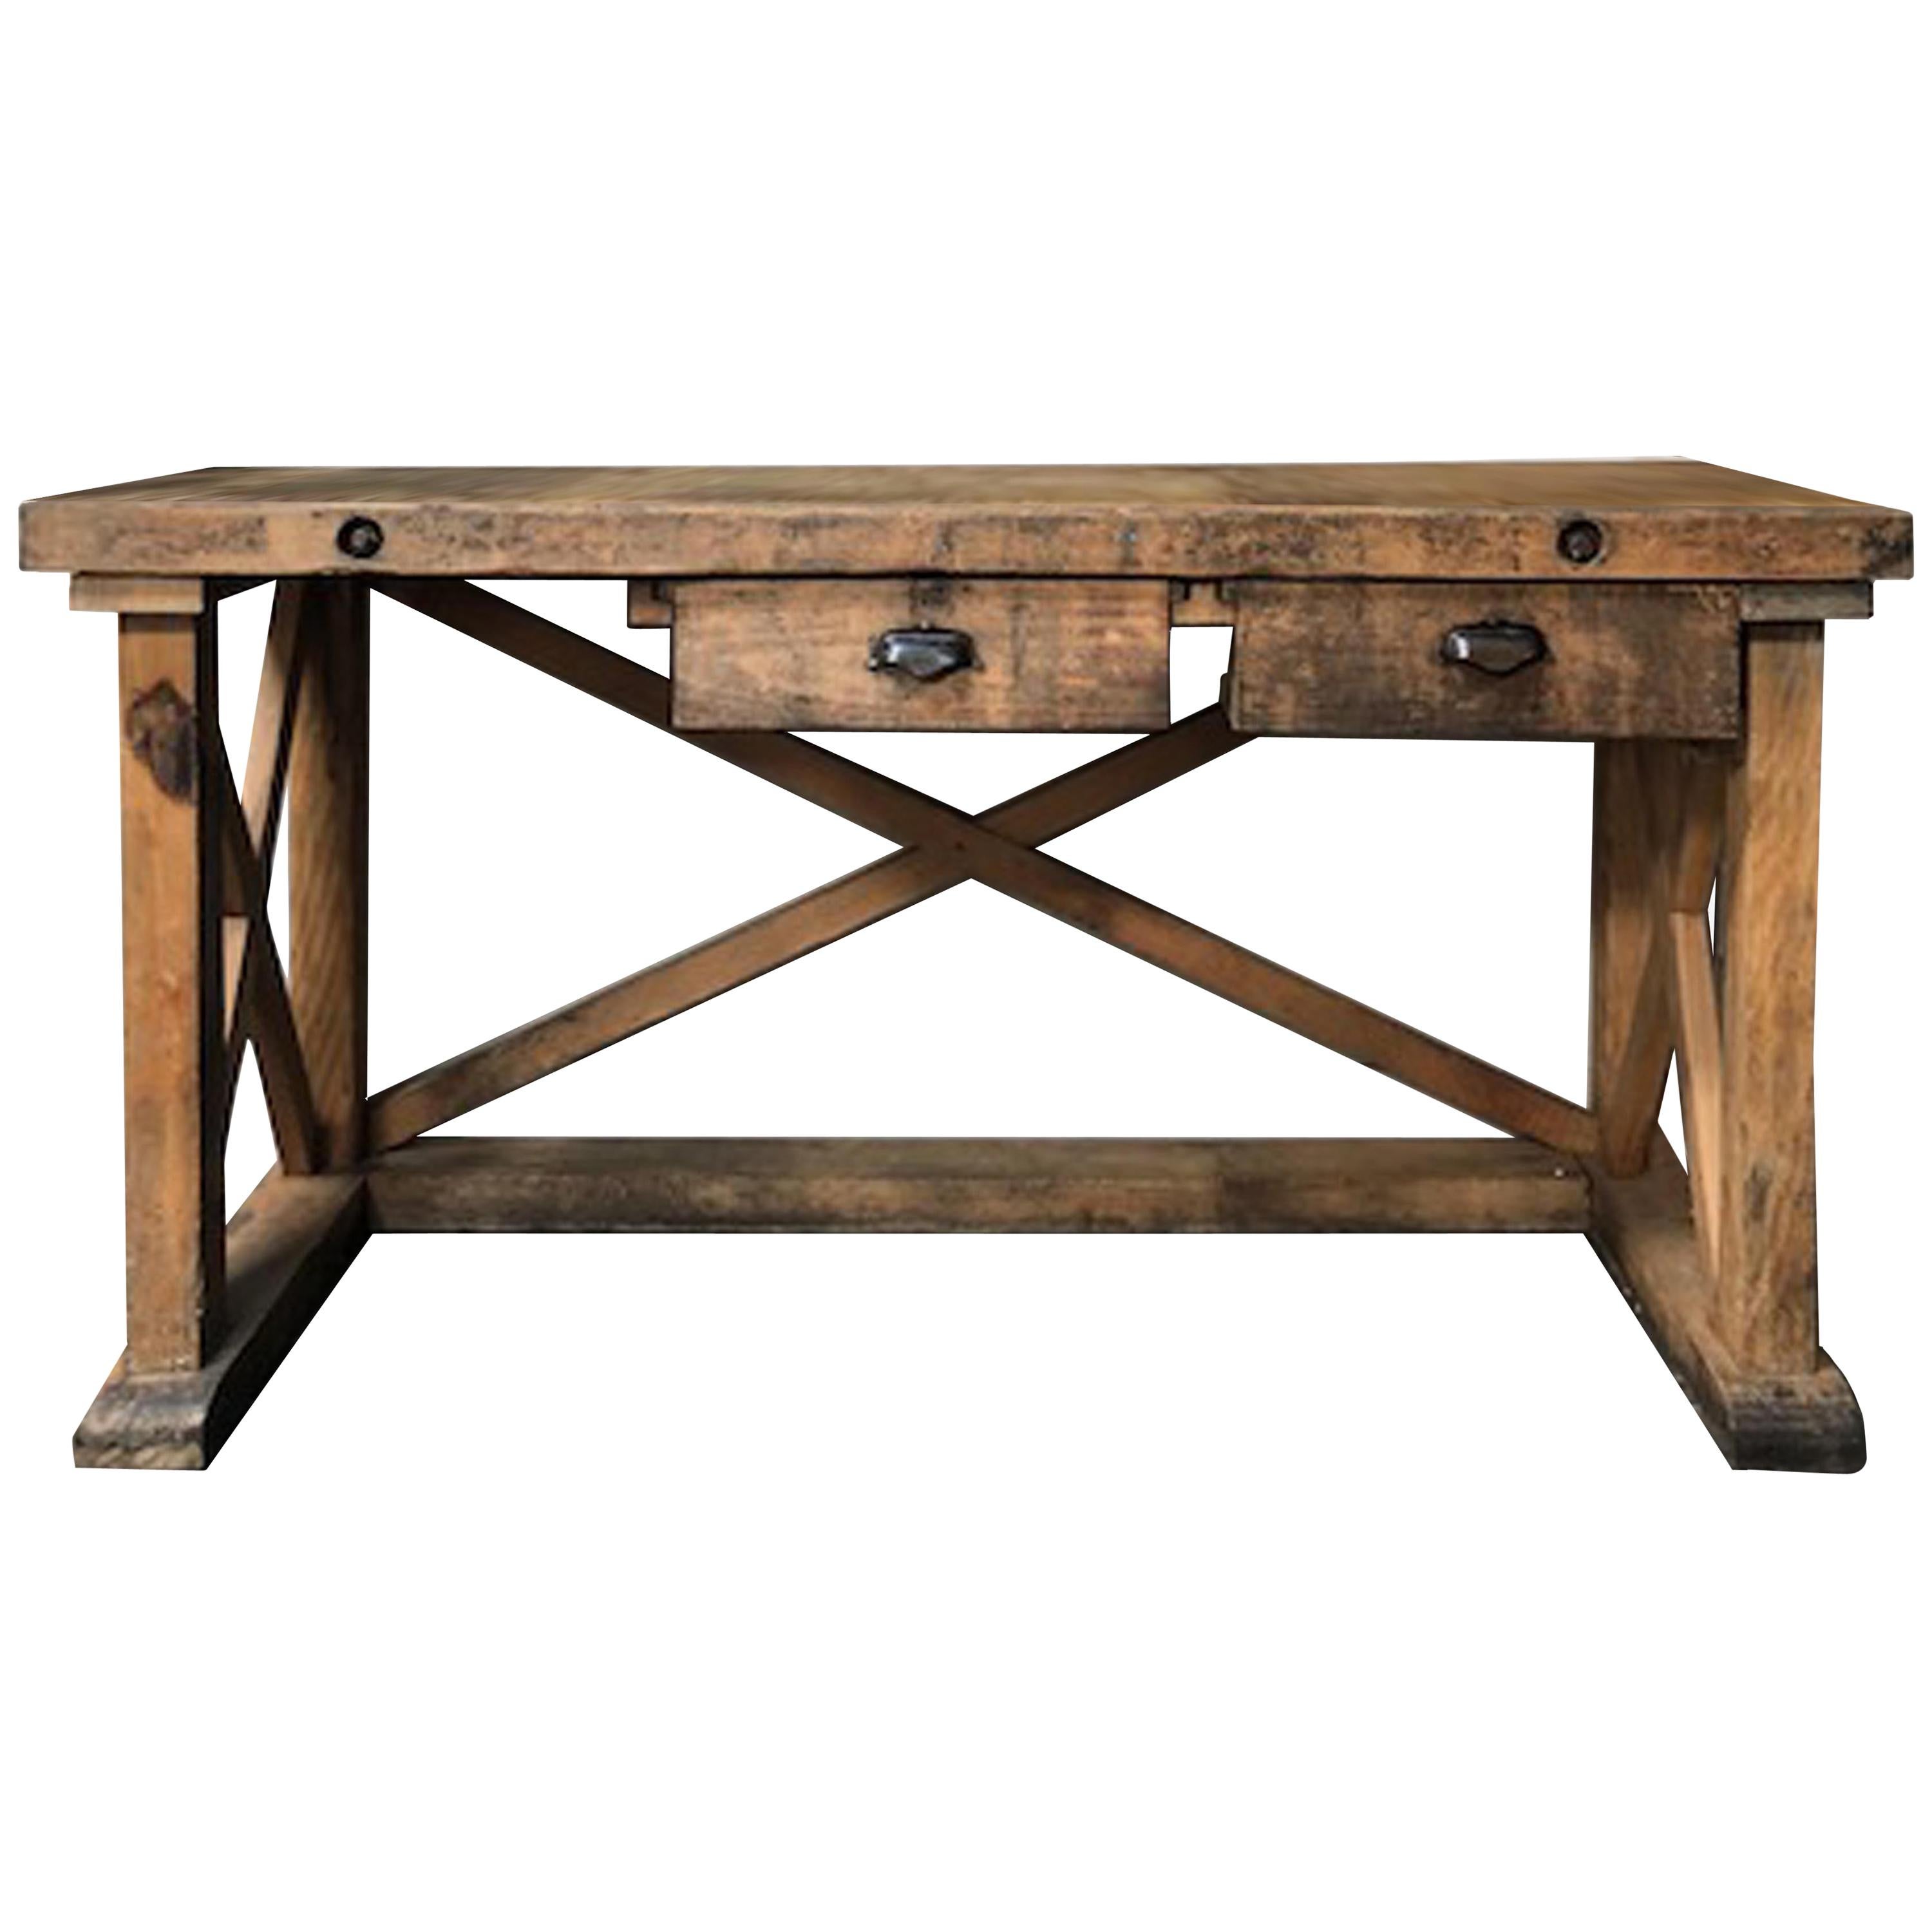 Late 19th Century Rustic Wood Sideboard or Work Table from France